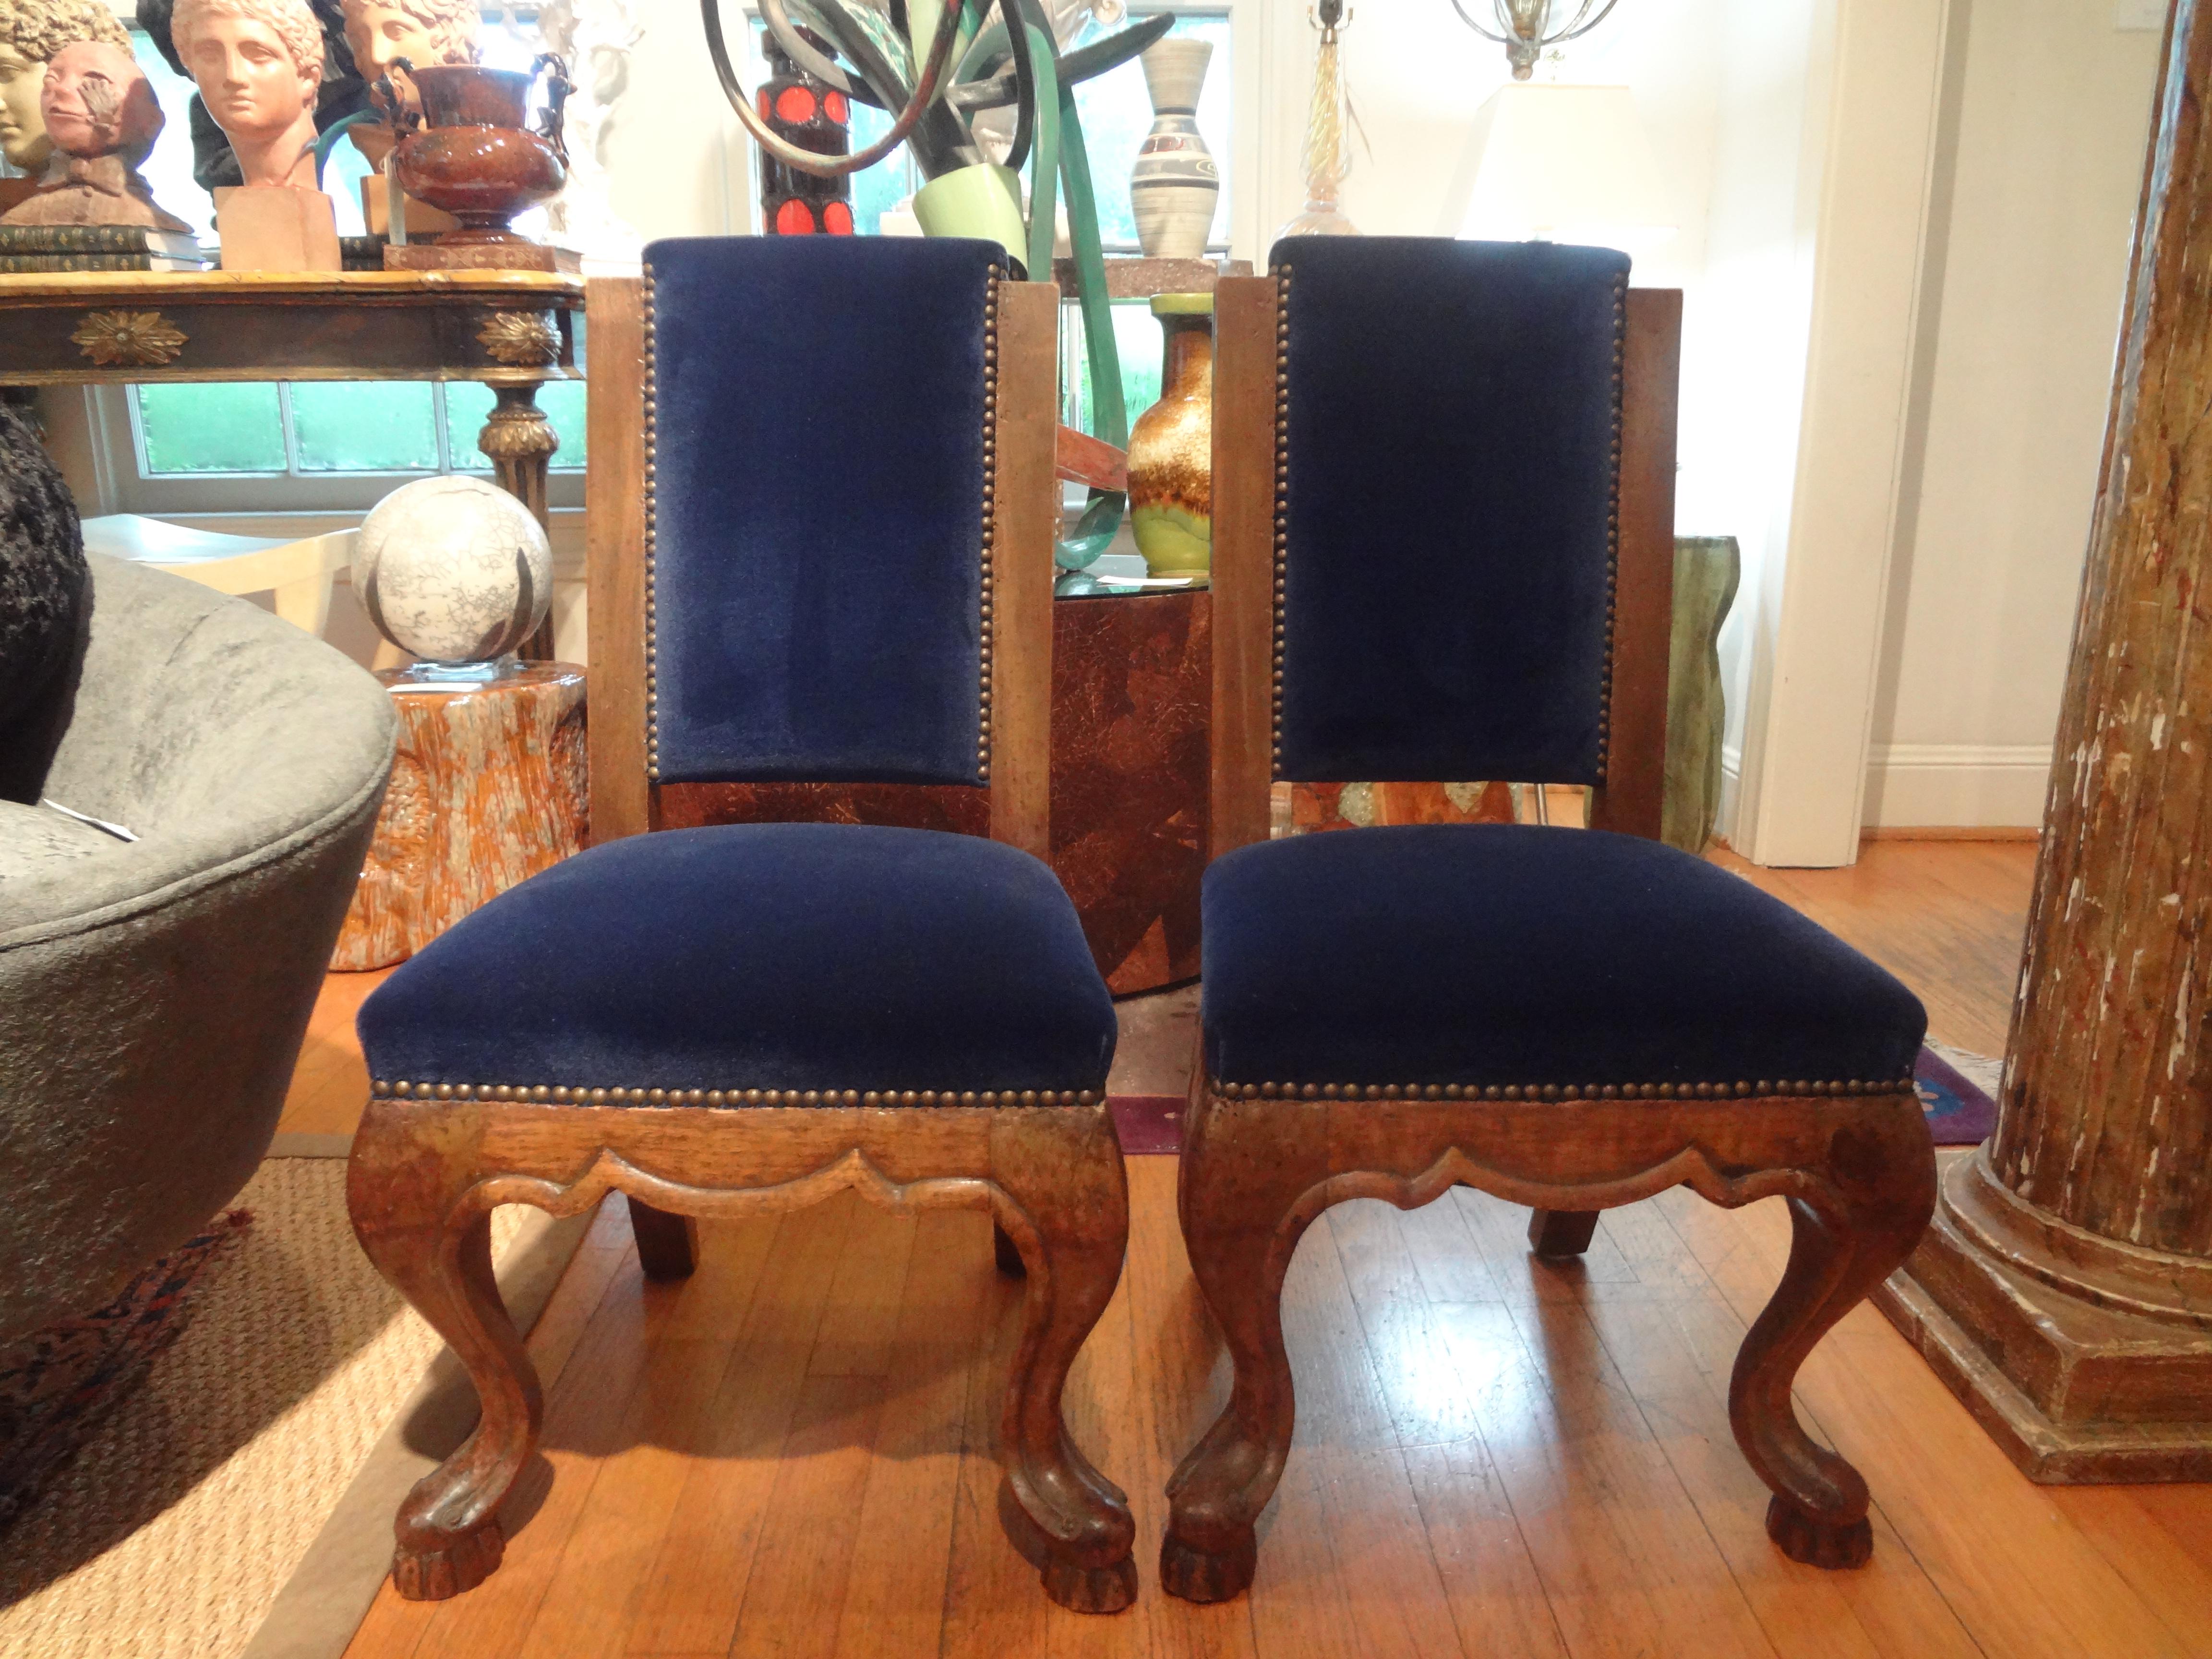 Pair of 19th century Italian walnut children's chairs.
Fabulous pair of 19th century Italian walnut children's chairs from Tuscany. This rare pair has gorgeous lines and has been professionally upholstered in dark blue mohair with brass nail head